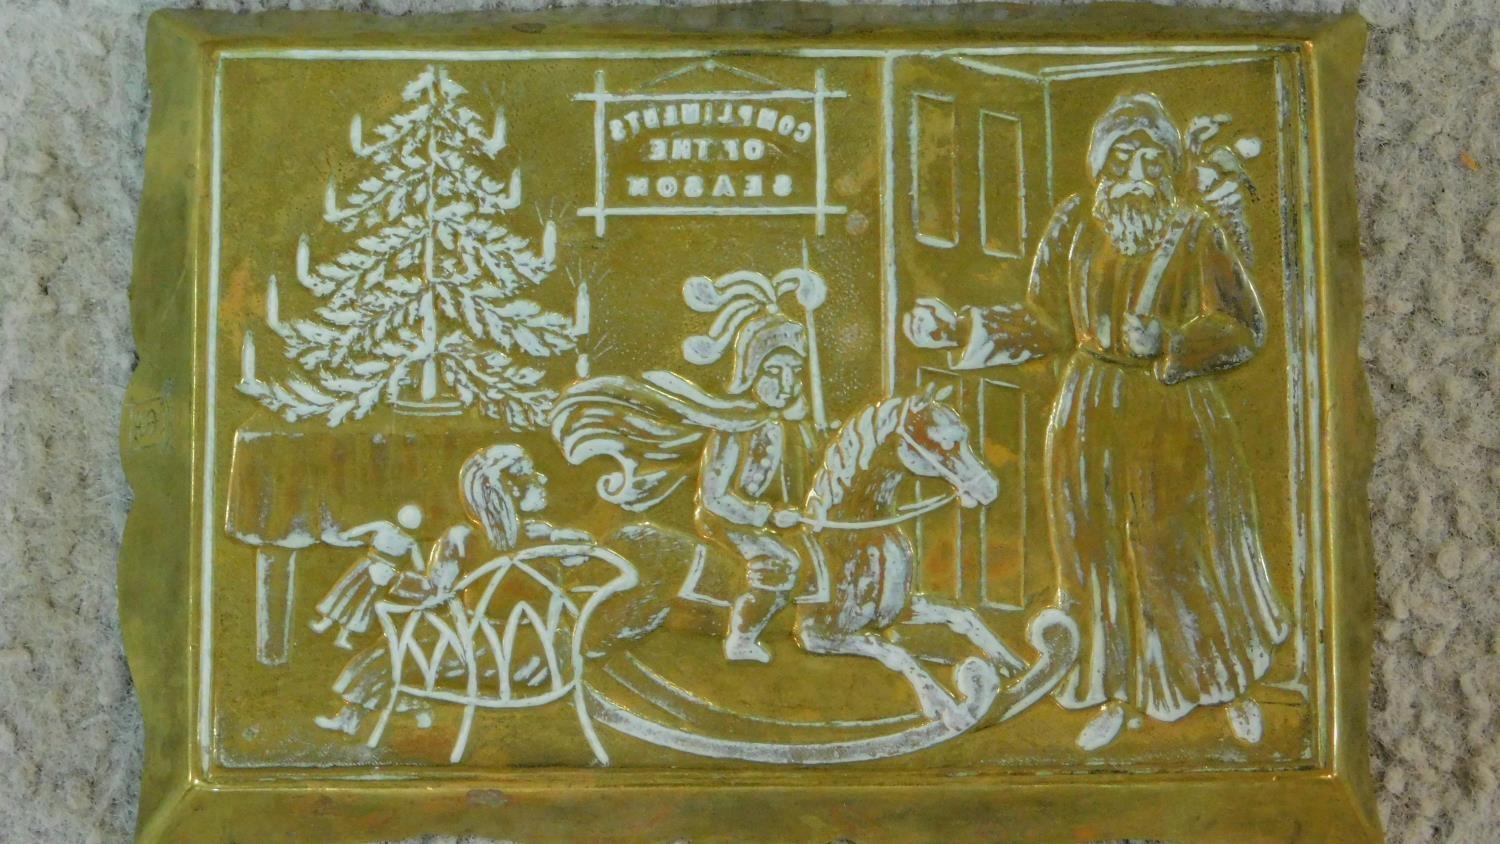 A pair of Victorian Punch and Judy brass door stops along with a repousse brass Christmas scene - Image 5 of 6